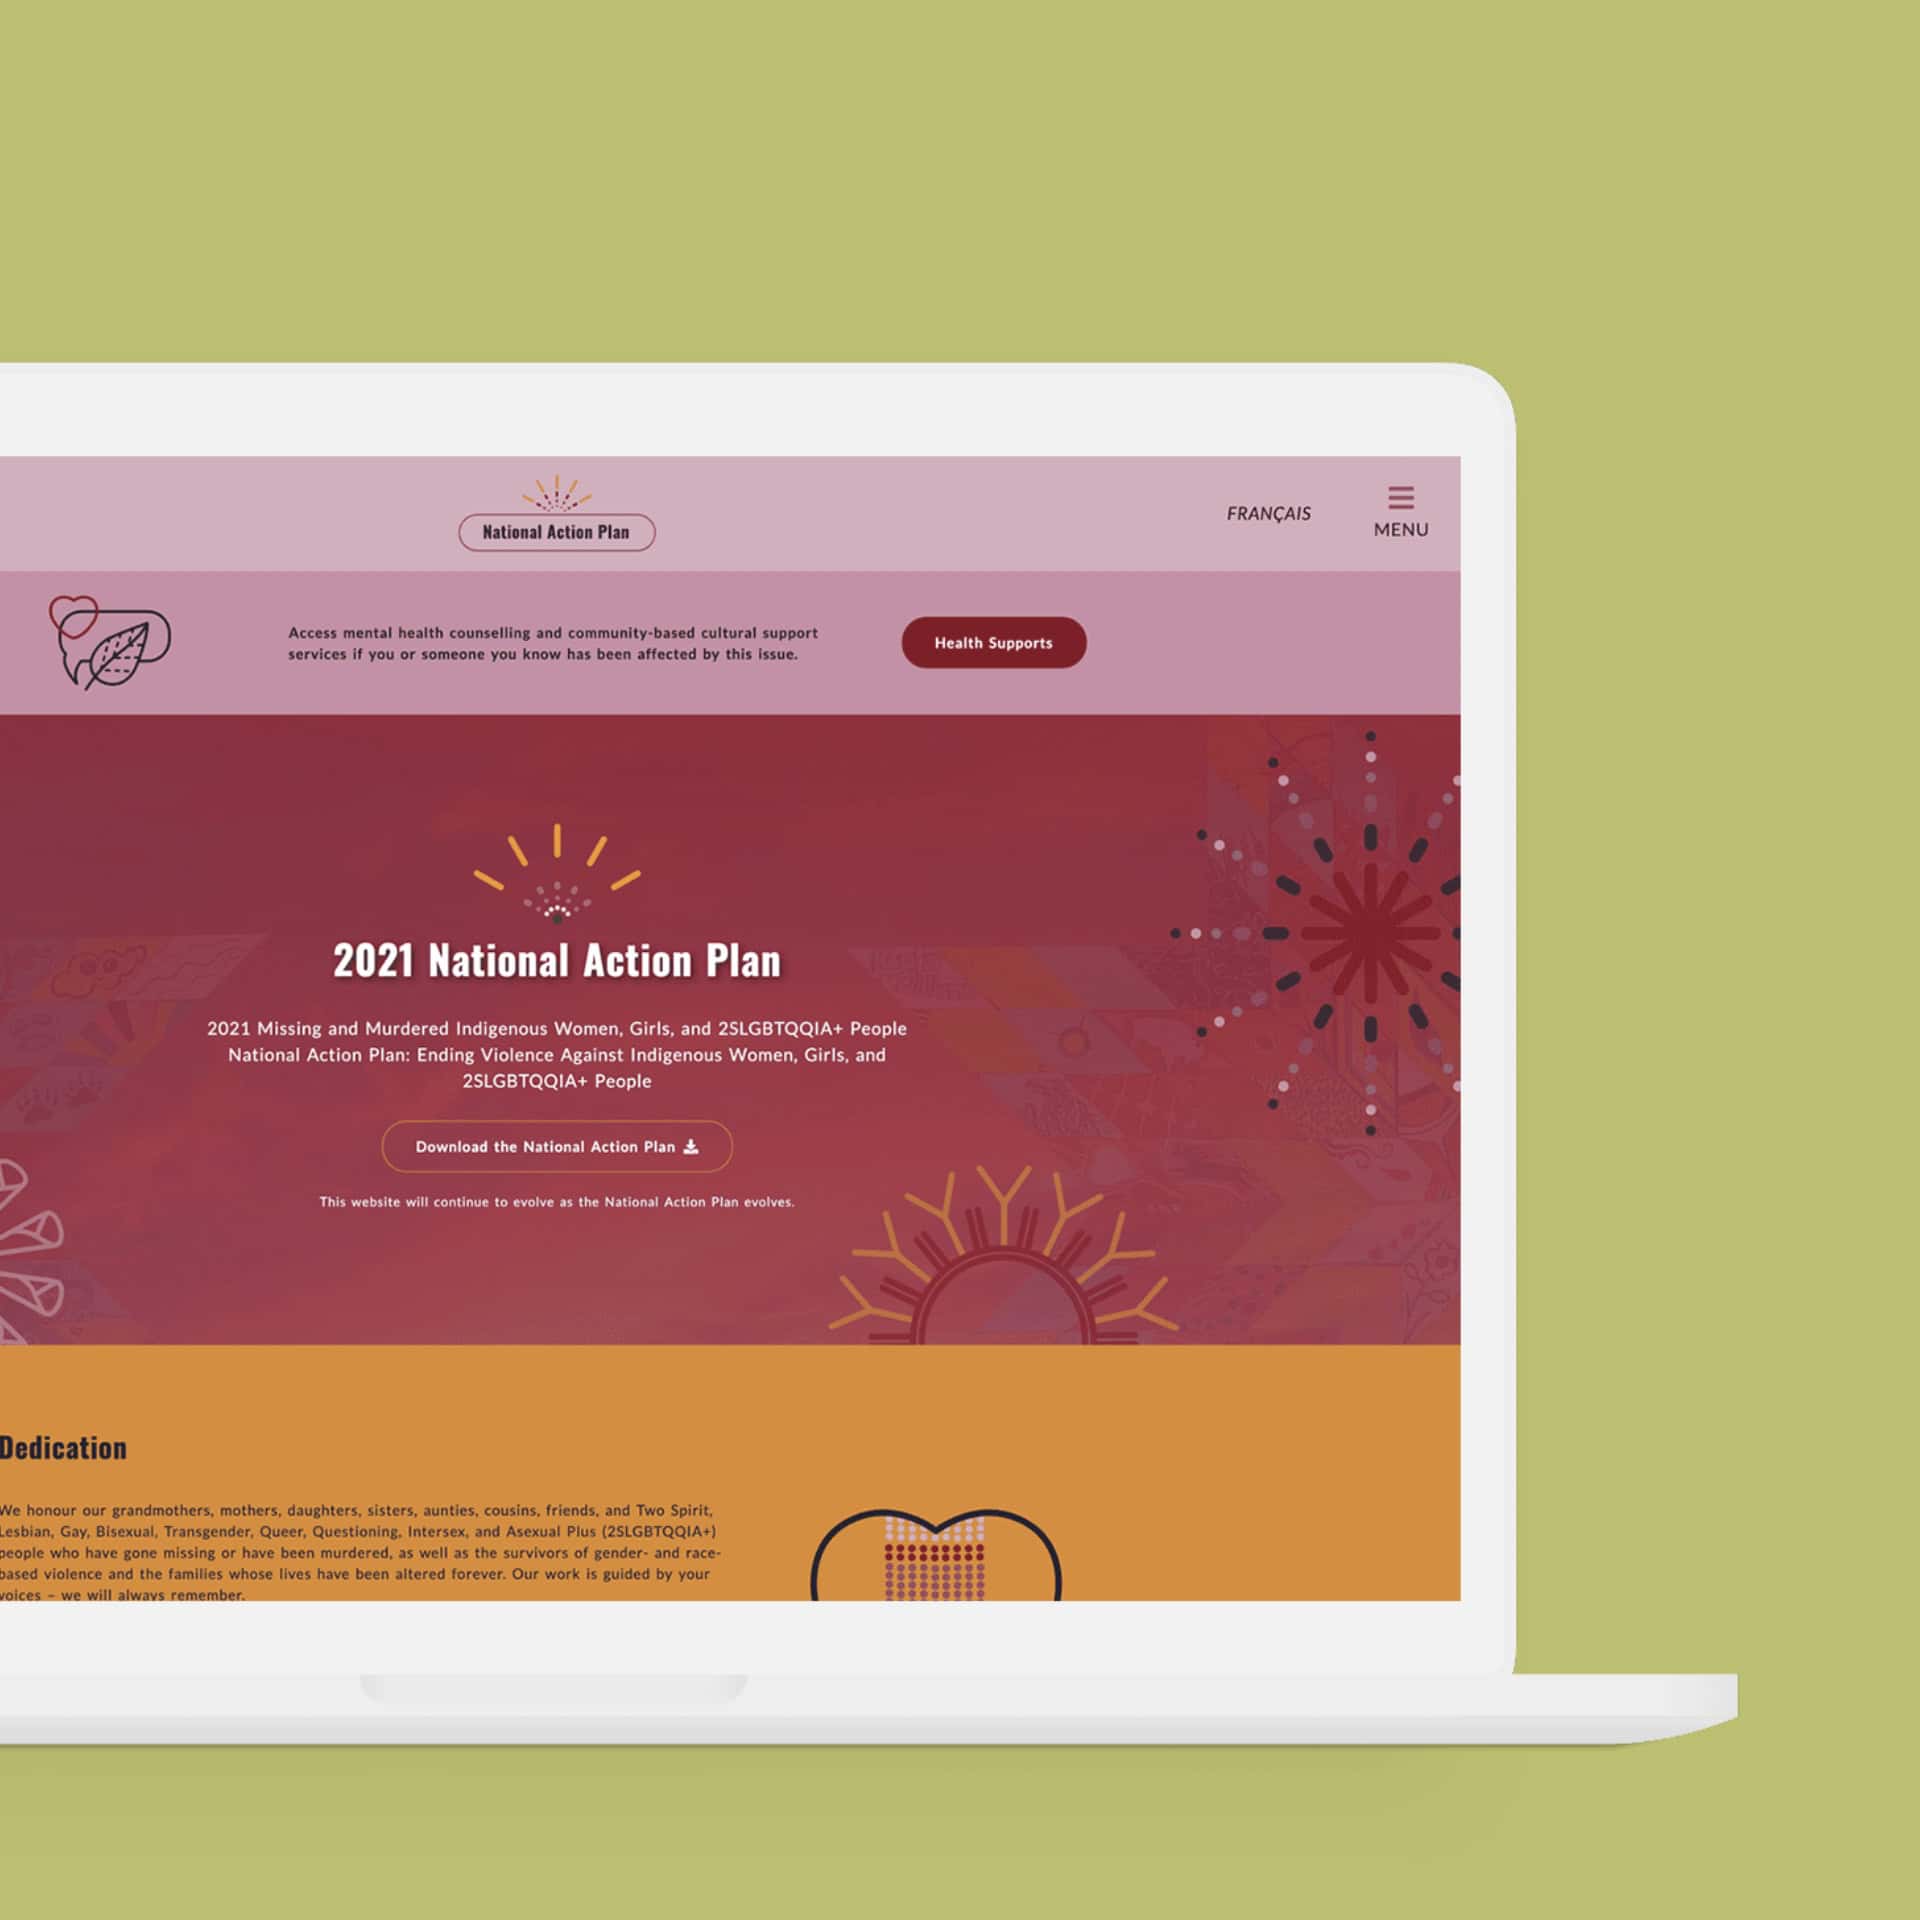 A macbook mockup of the 2021 National Action Plan website. The site features the main page that gives a blurb about the National Action Plan and a Dedication section.